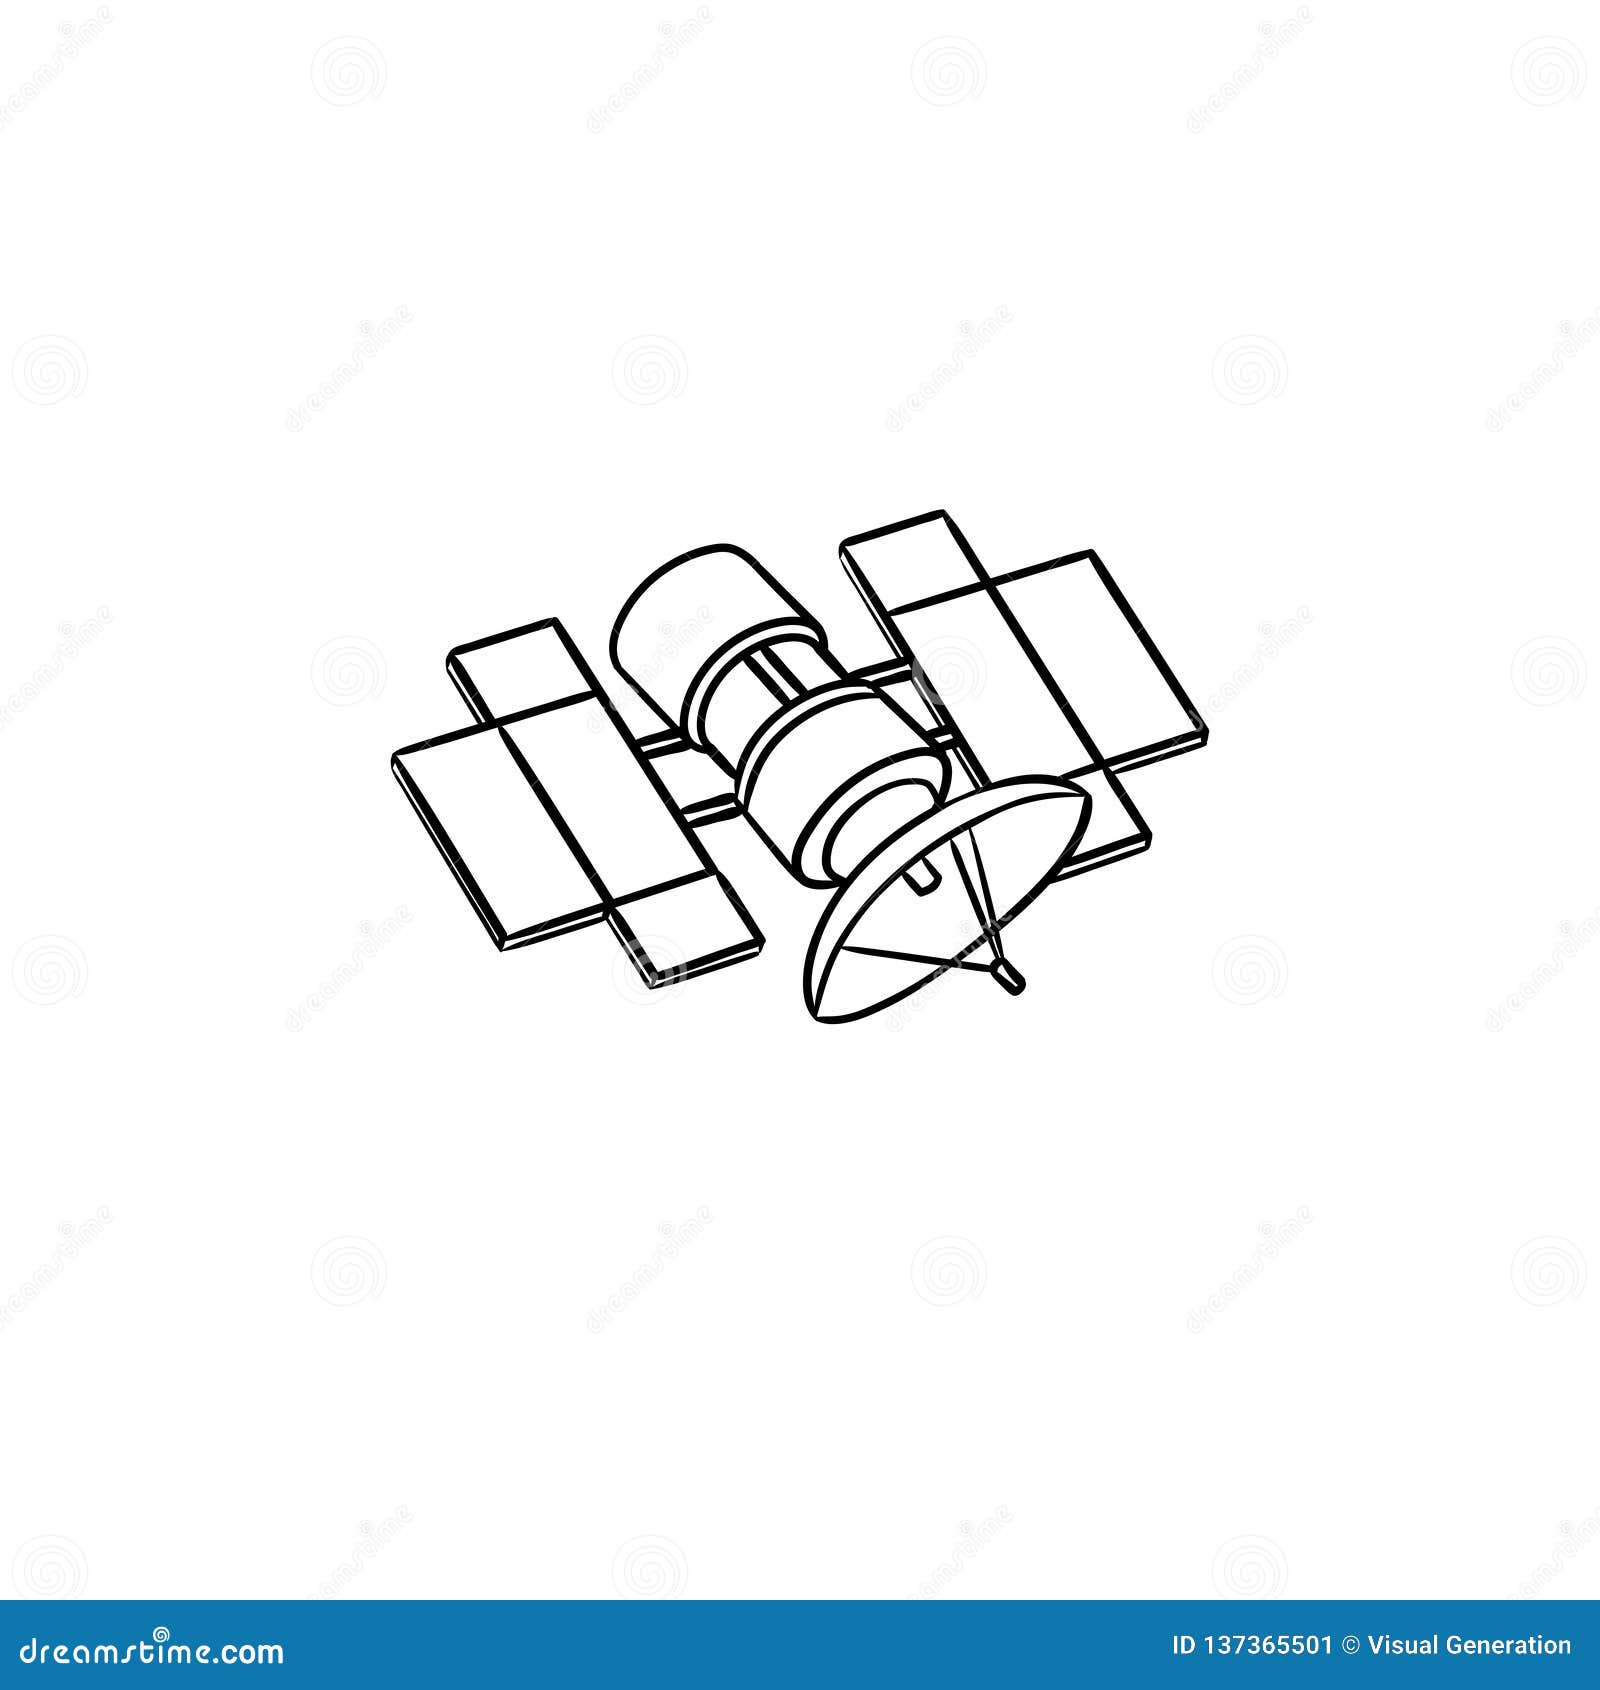 Satellite Hand Drawn Outline Doodle Icon. Stock Vector - Illustration